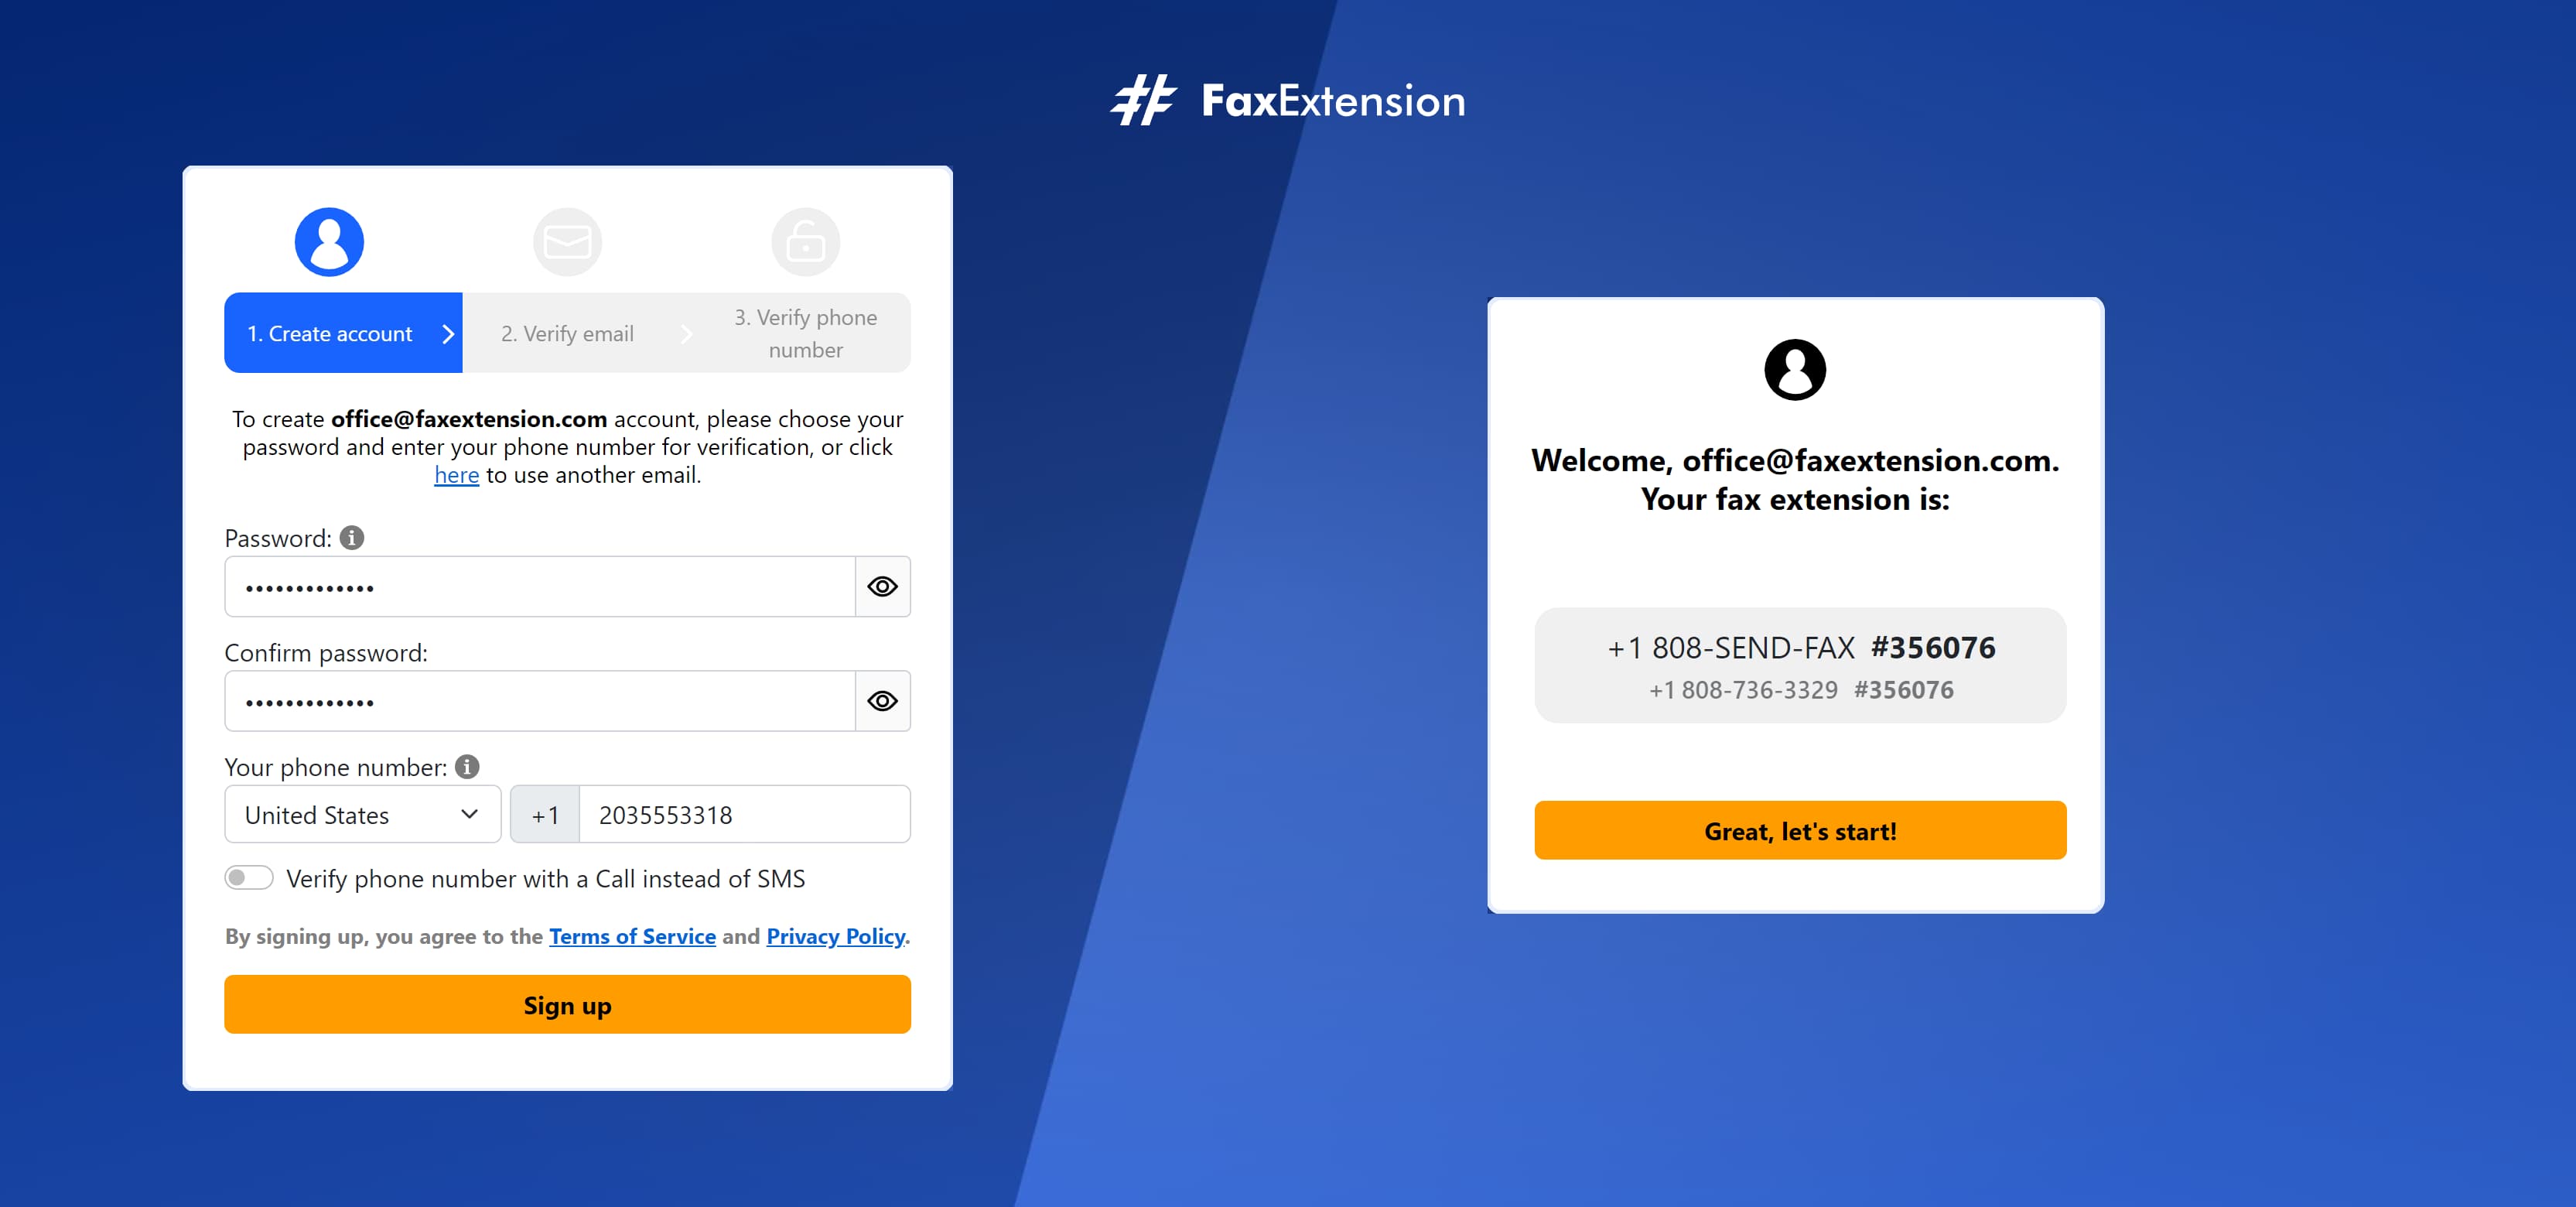 Get your own free fax extension number instantly and send fax from Mac